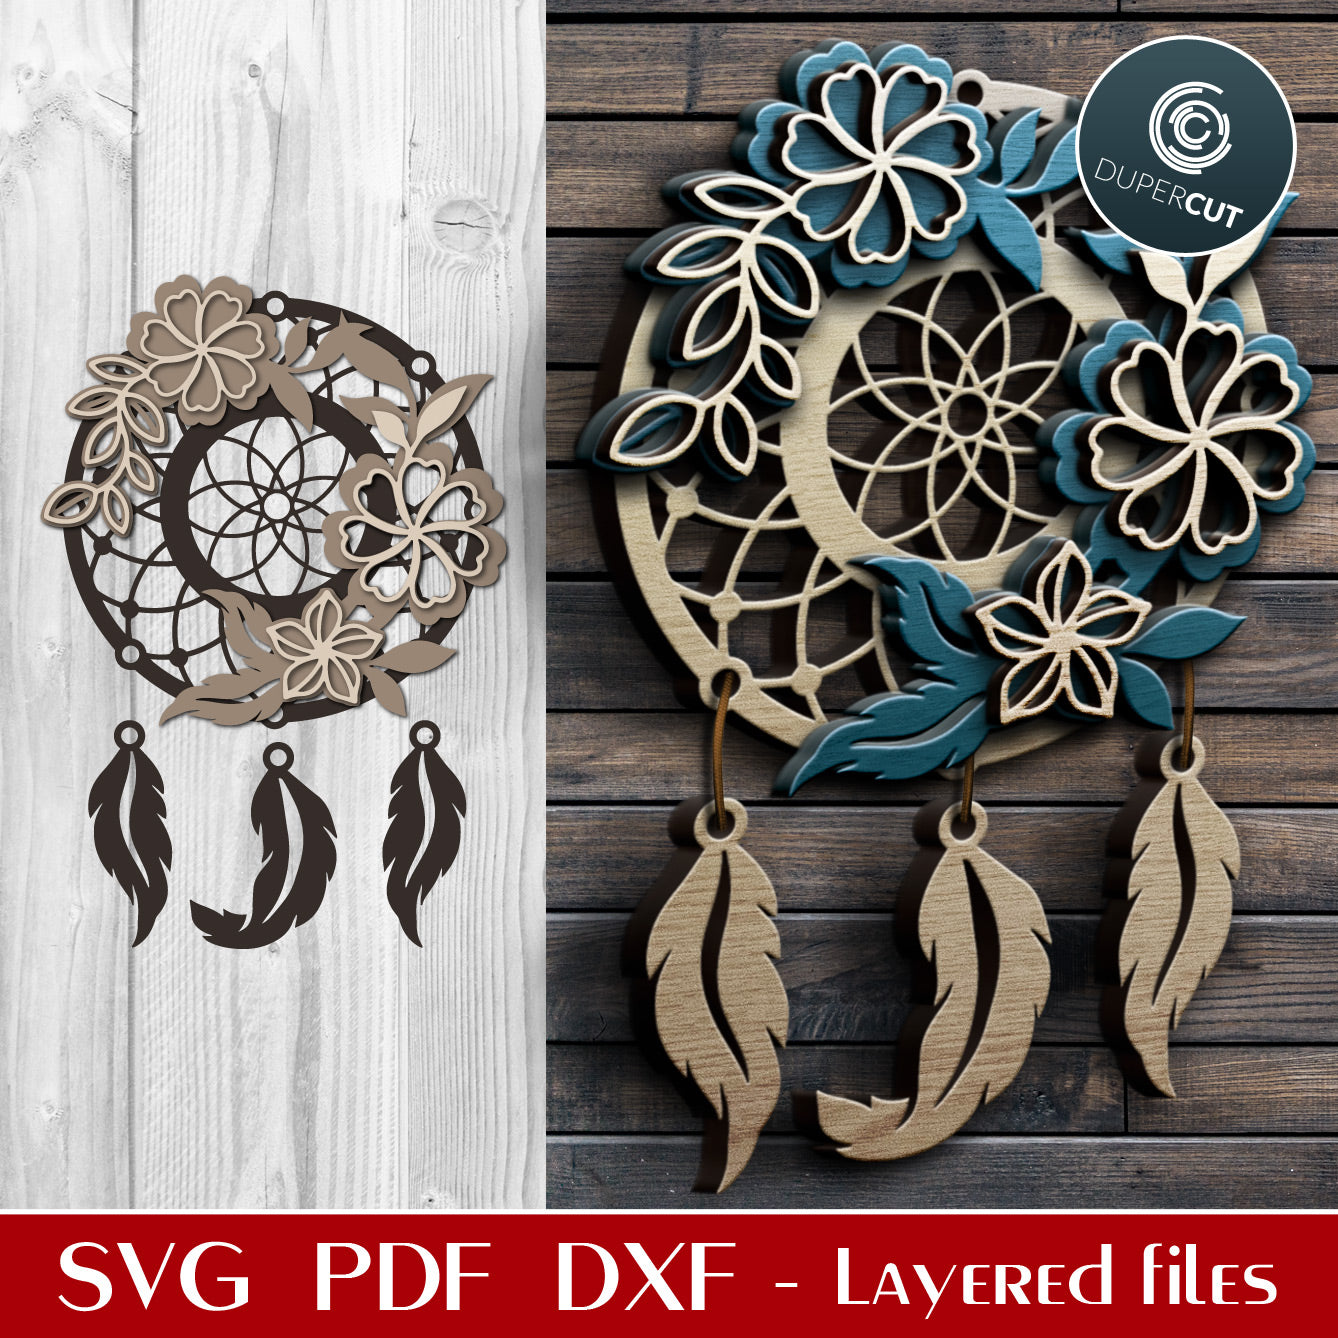 Floral dreamcatcher - layered cutting template - SVG PDF DXF vector files for laser cutting with Glowforge, Cricut, Silhouette Cameo, CNC plasma machines